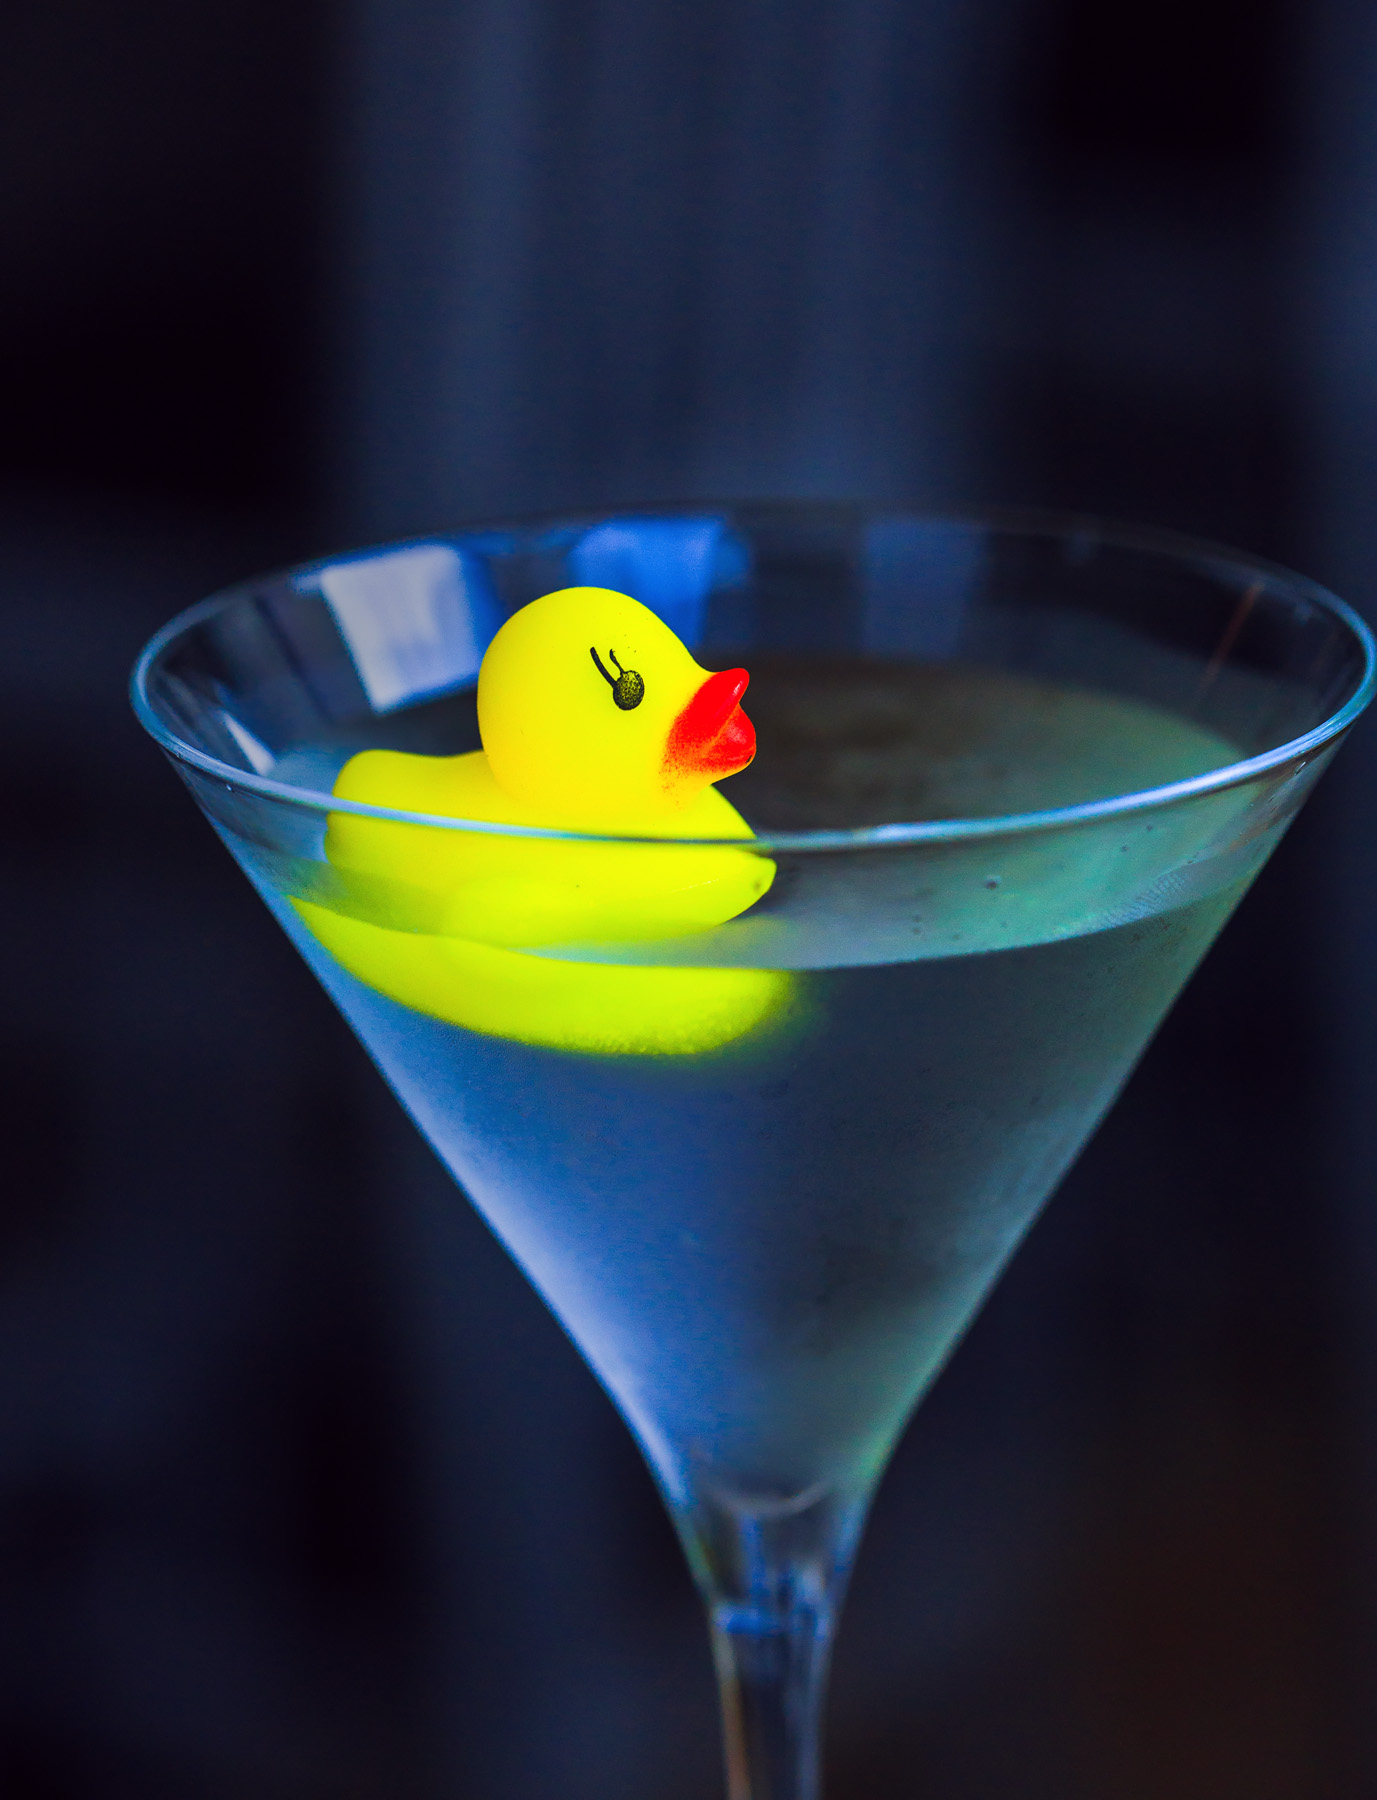 The "Bathtub Martini", part of Bottlest bar's new cocktail mixology program, is topped with a rubber ducky.